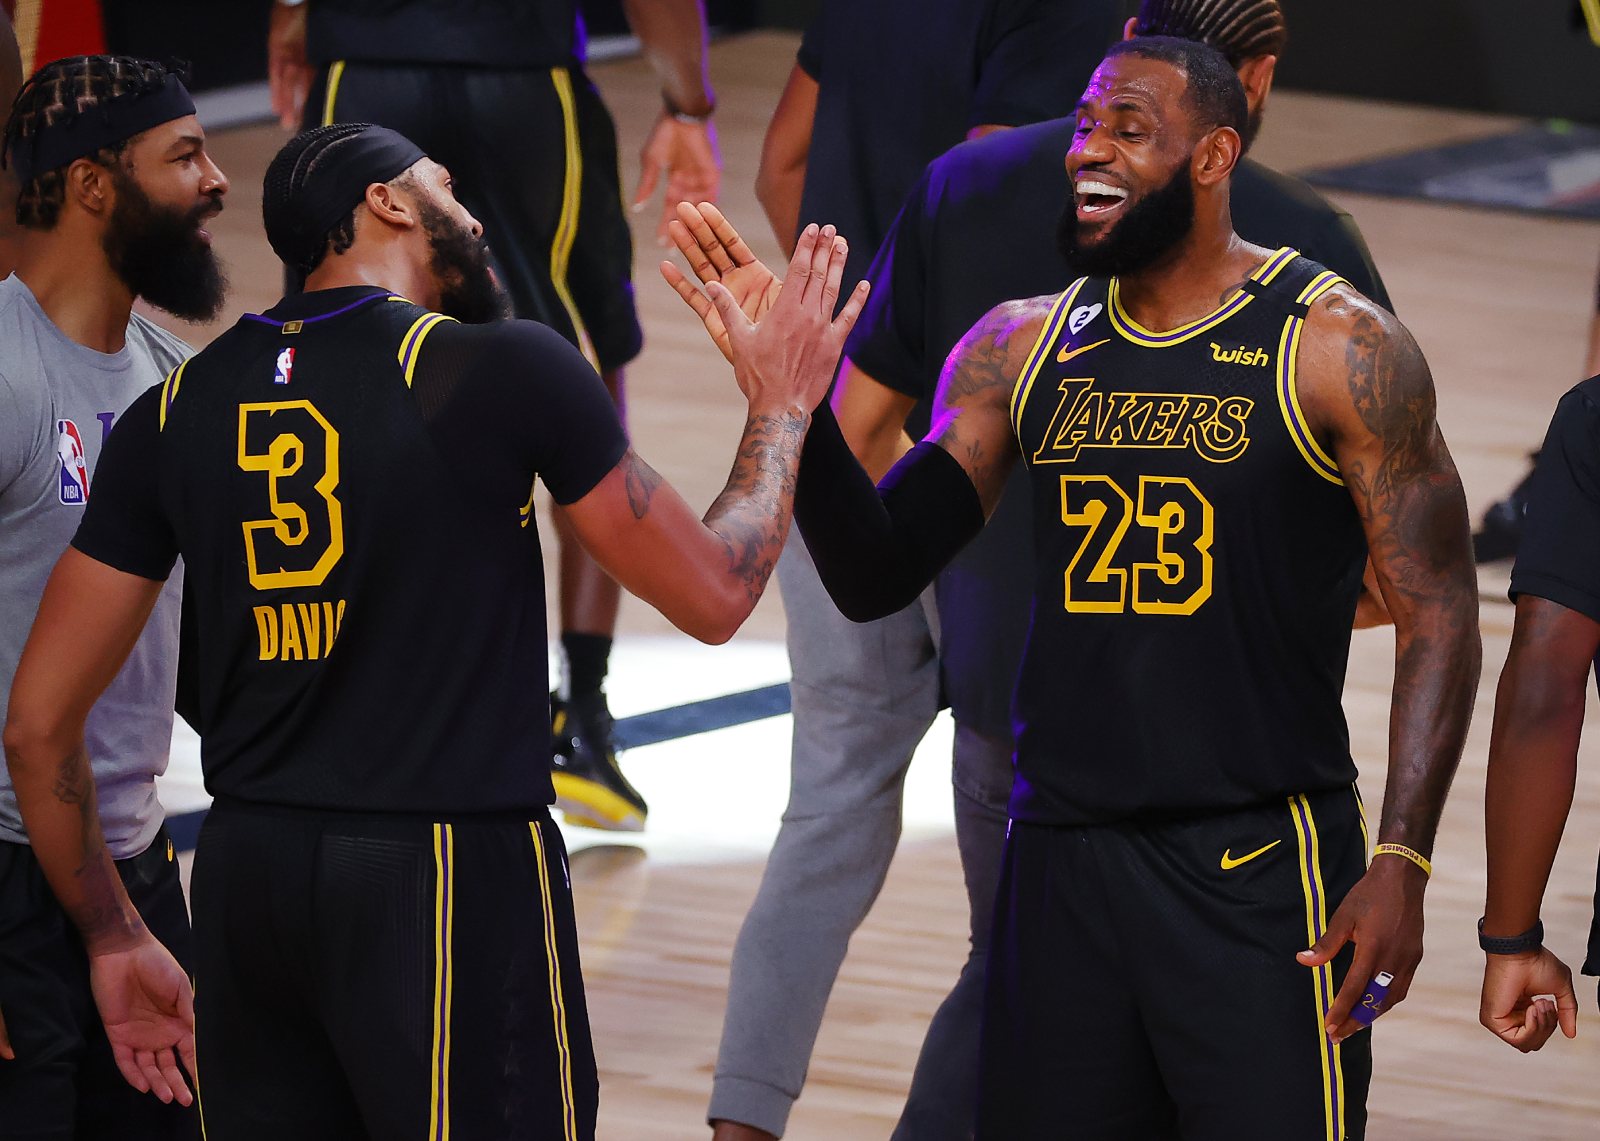 LeBron James has played well with all his Lakers teammates. However, he has had great chemistry with a teammate that isn't Anthony Davis.